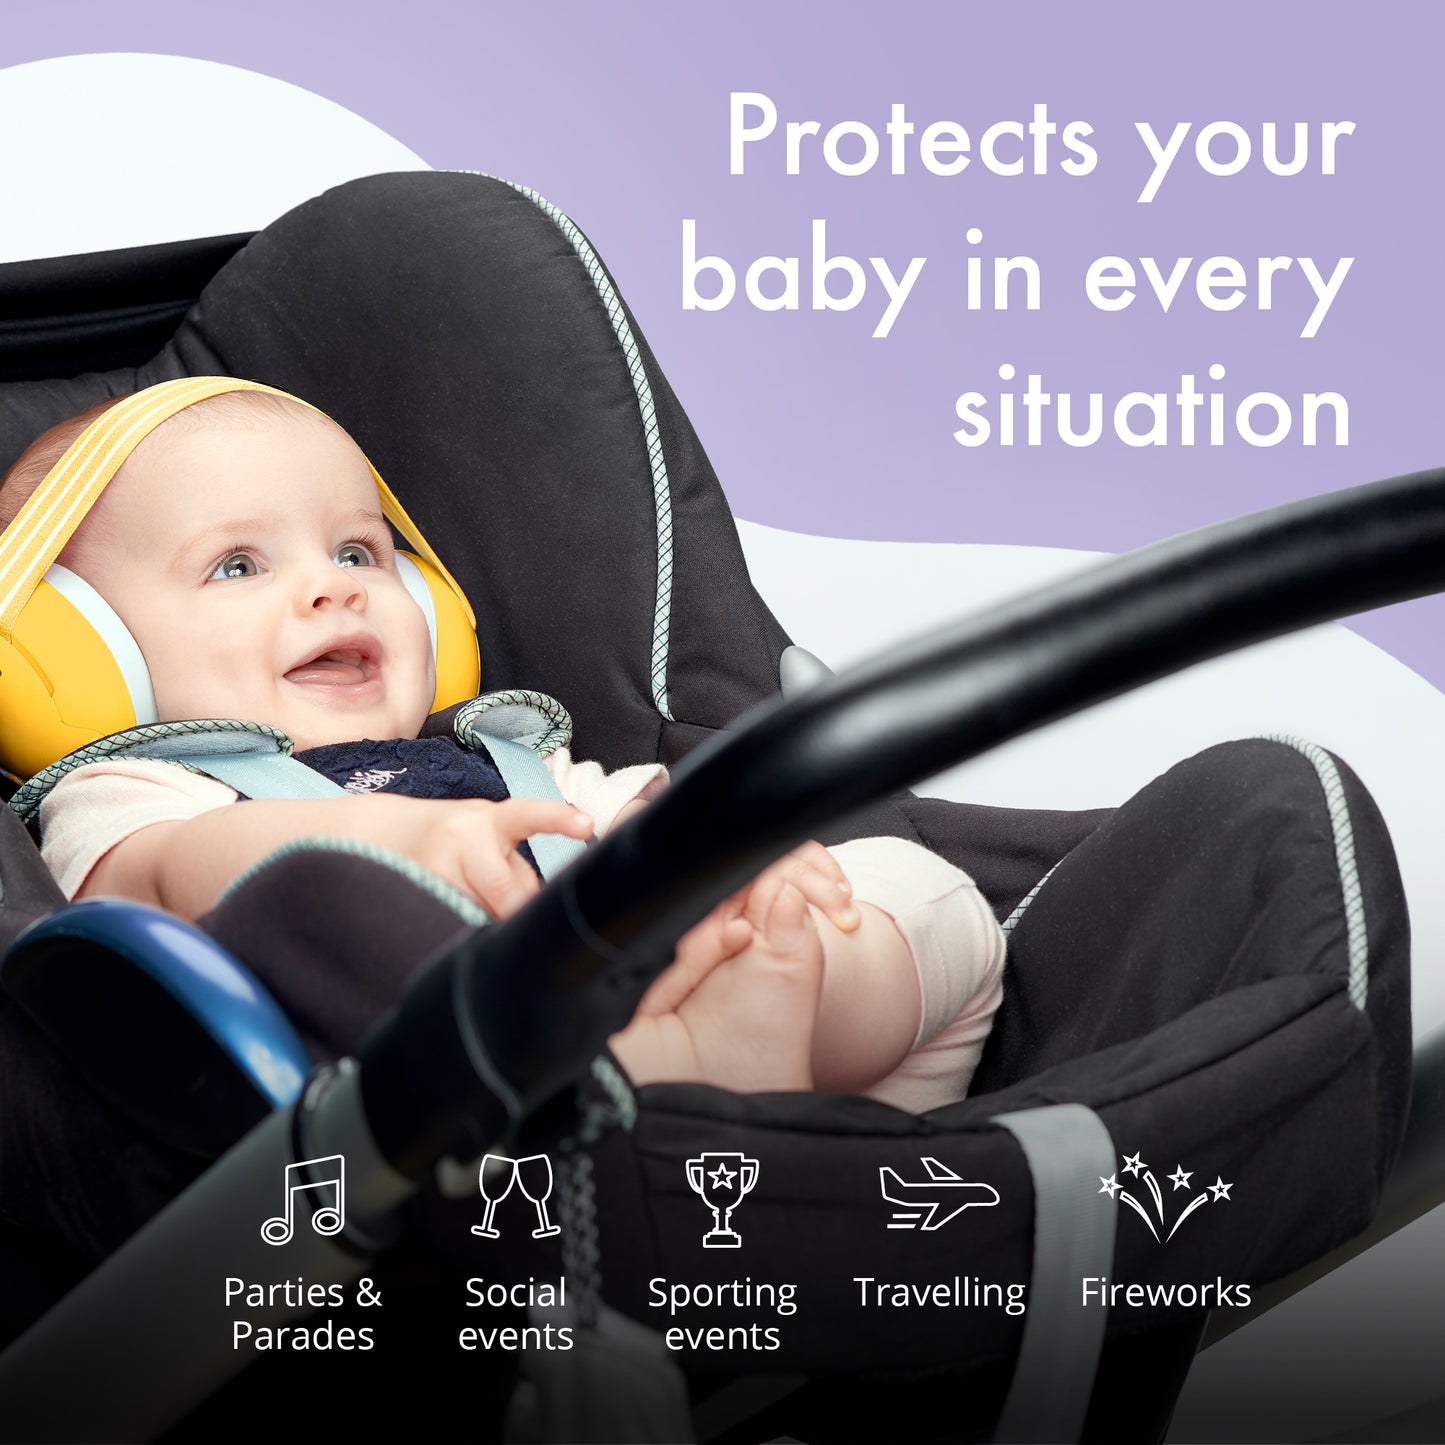 Protects your baby in every situation